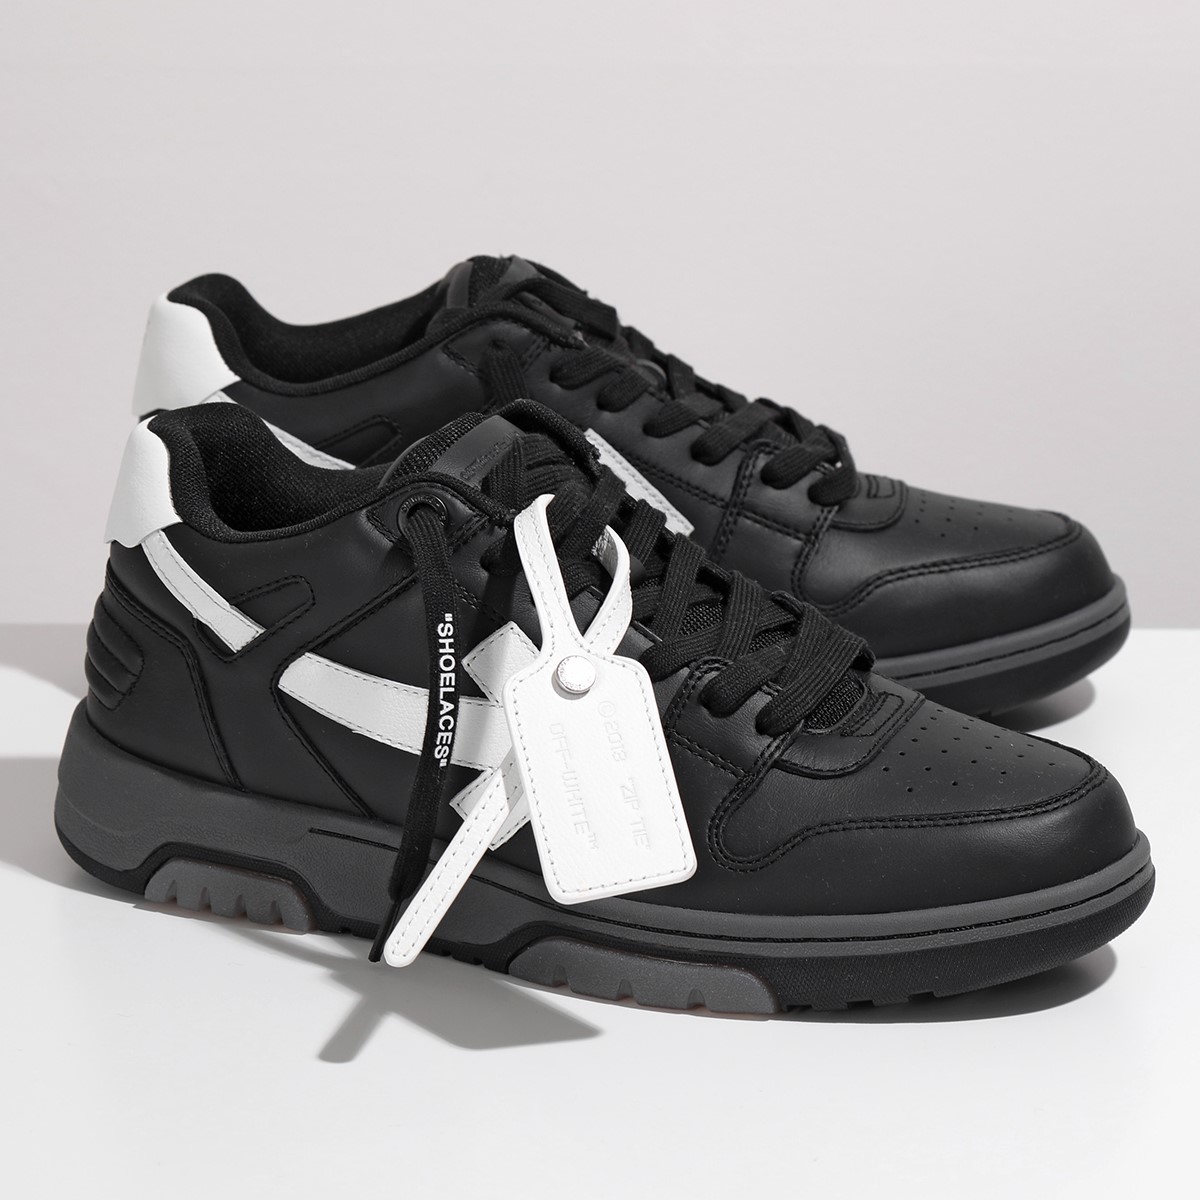 OFF-WHITE オフホワイト VIRGIL ABLOH スニーカー OUT OFF OFIFICE SNEAKER  OMIA189F21LEA001 メンズ カーフレザー ローカット 靴 1001 | インポートセレクト musee